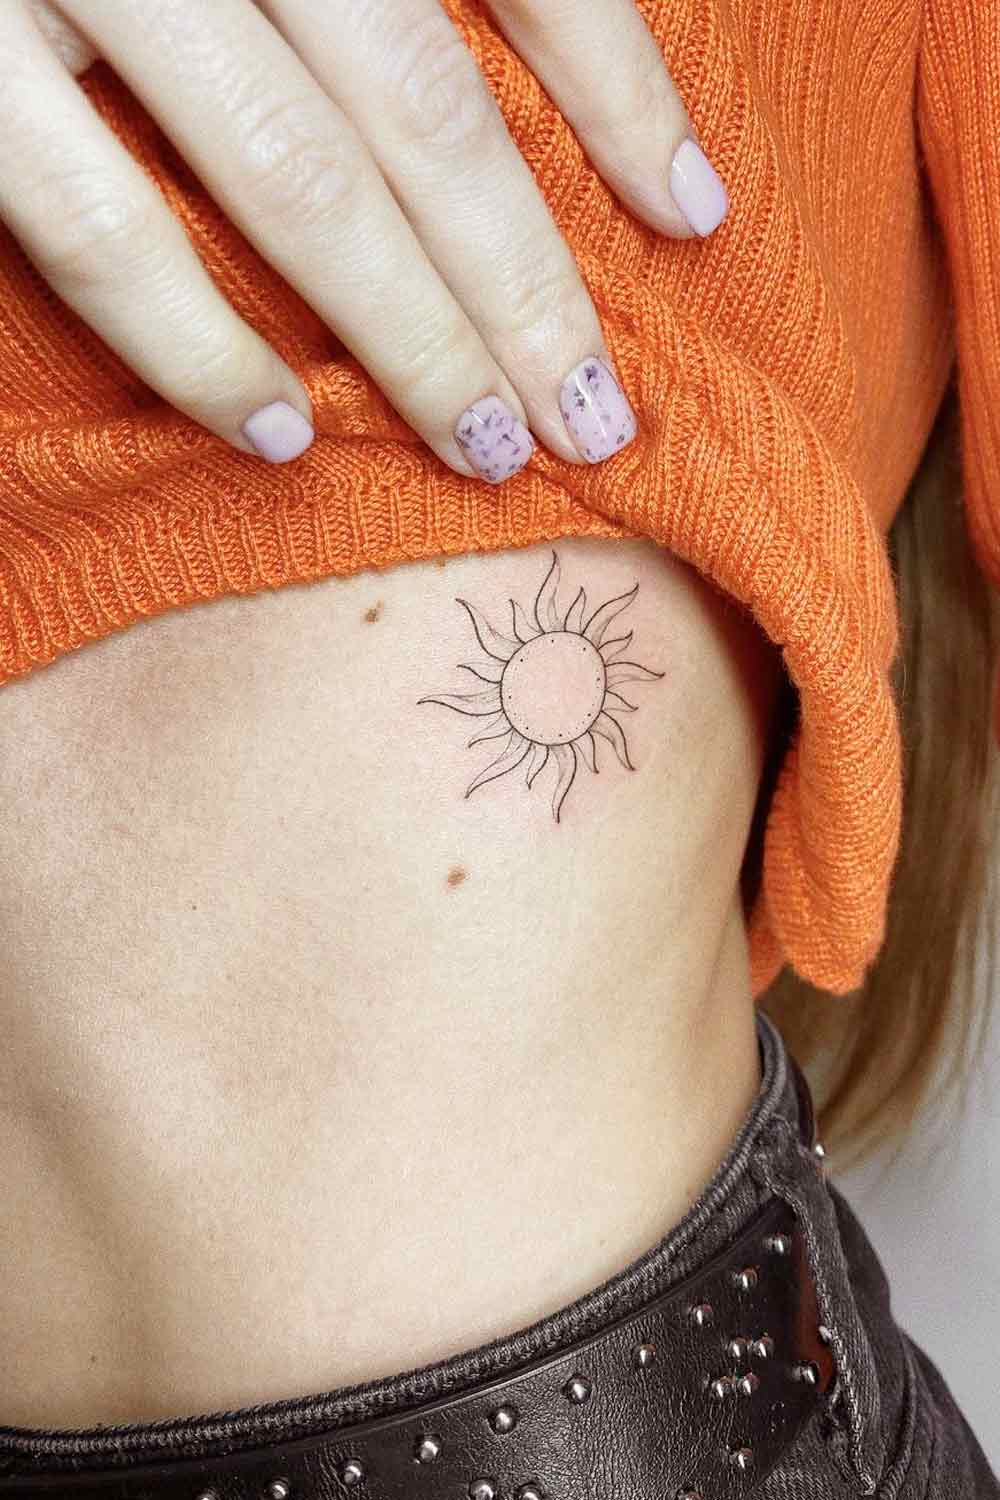 Aftercare for Minimalist Tattoos